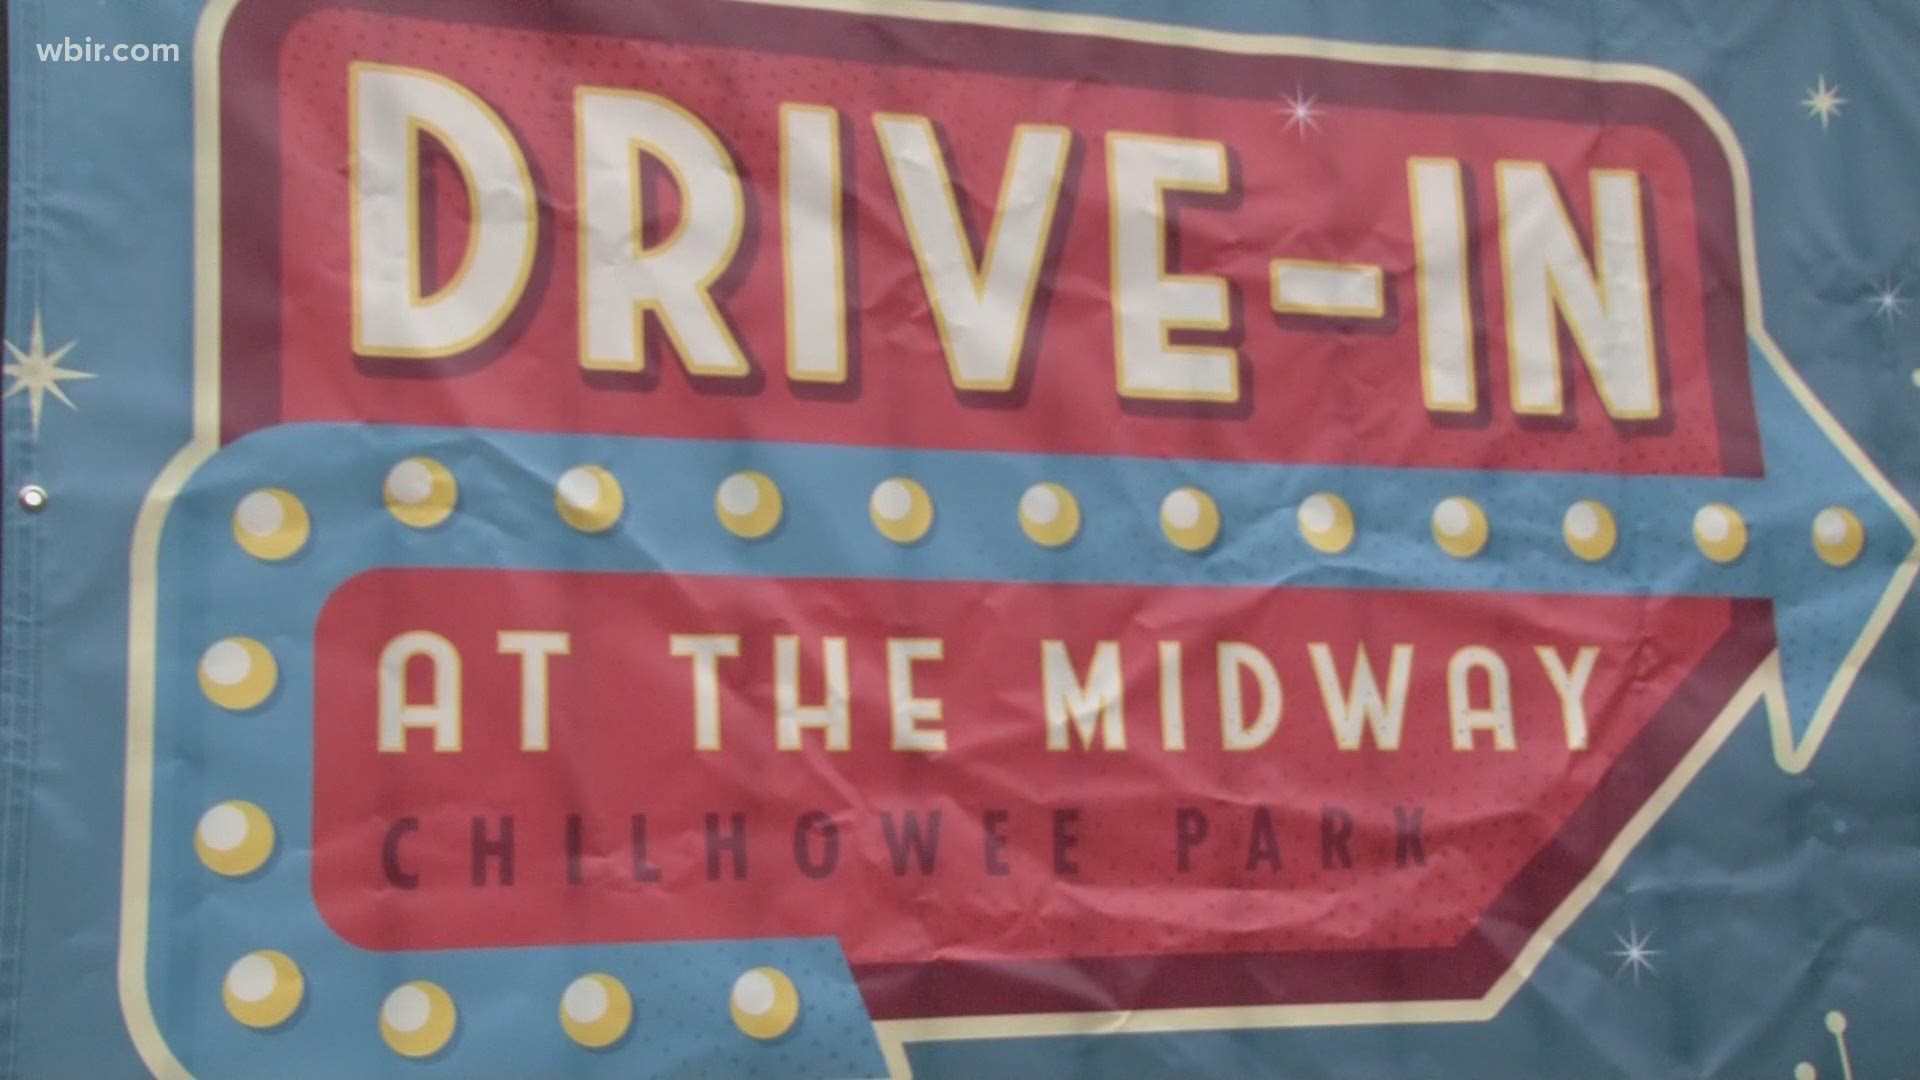 Drive-ins have seen more visitors stop by, as theaters limit showings and some temporally are closing.